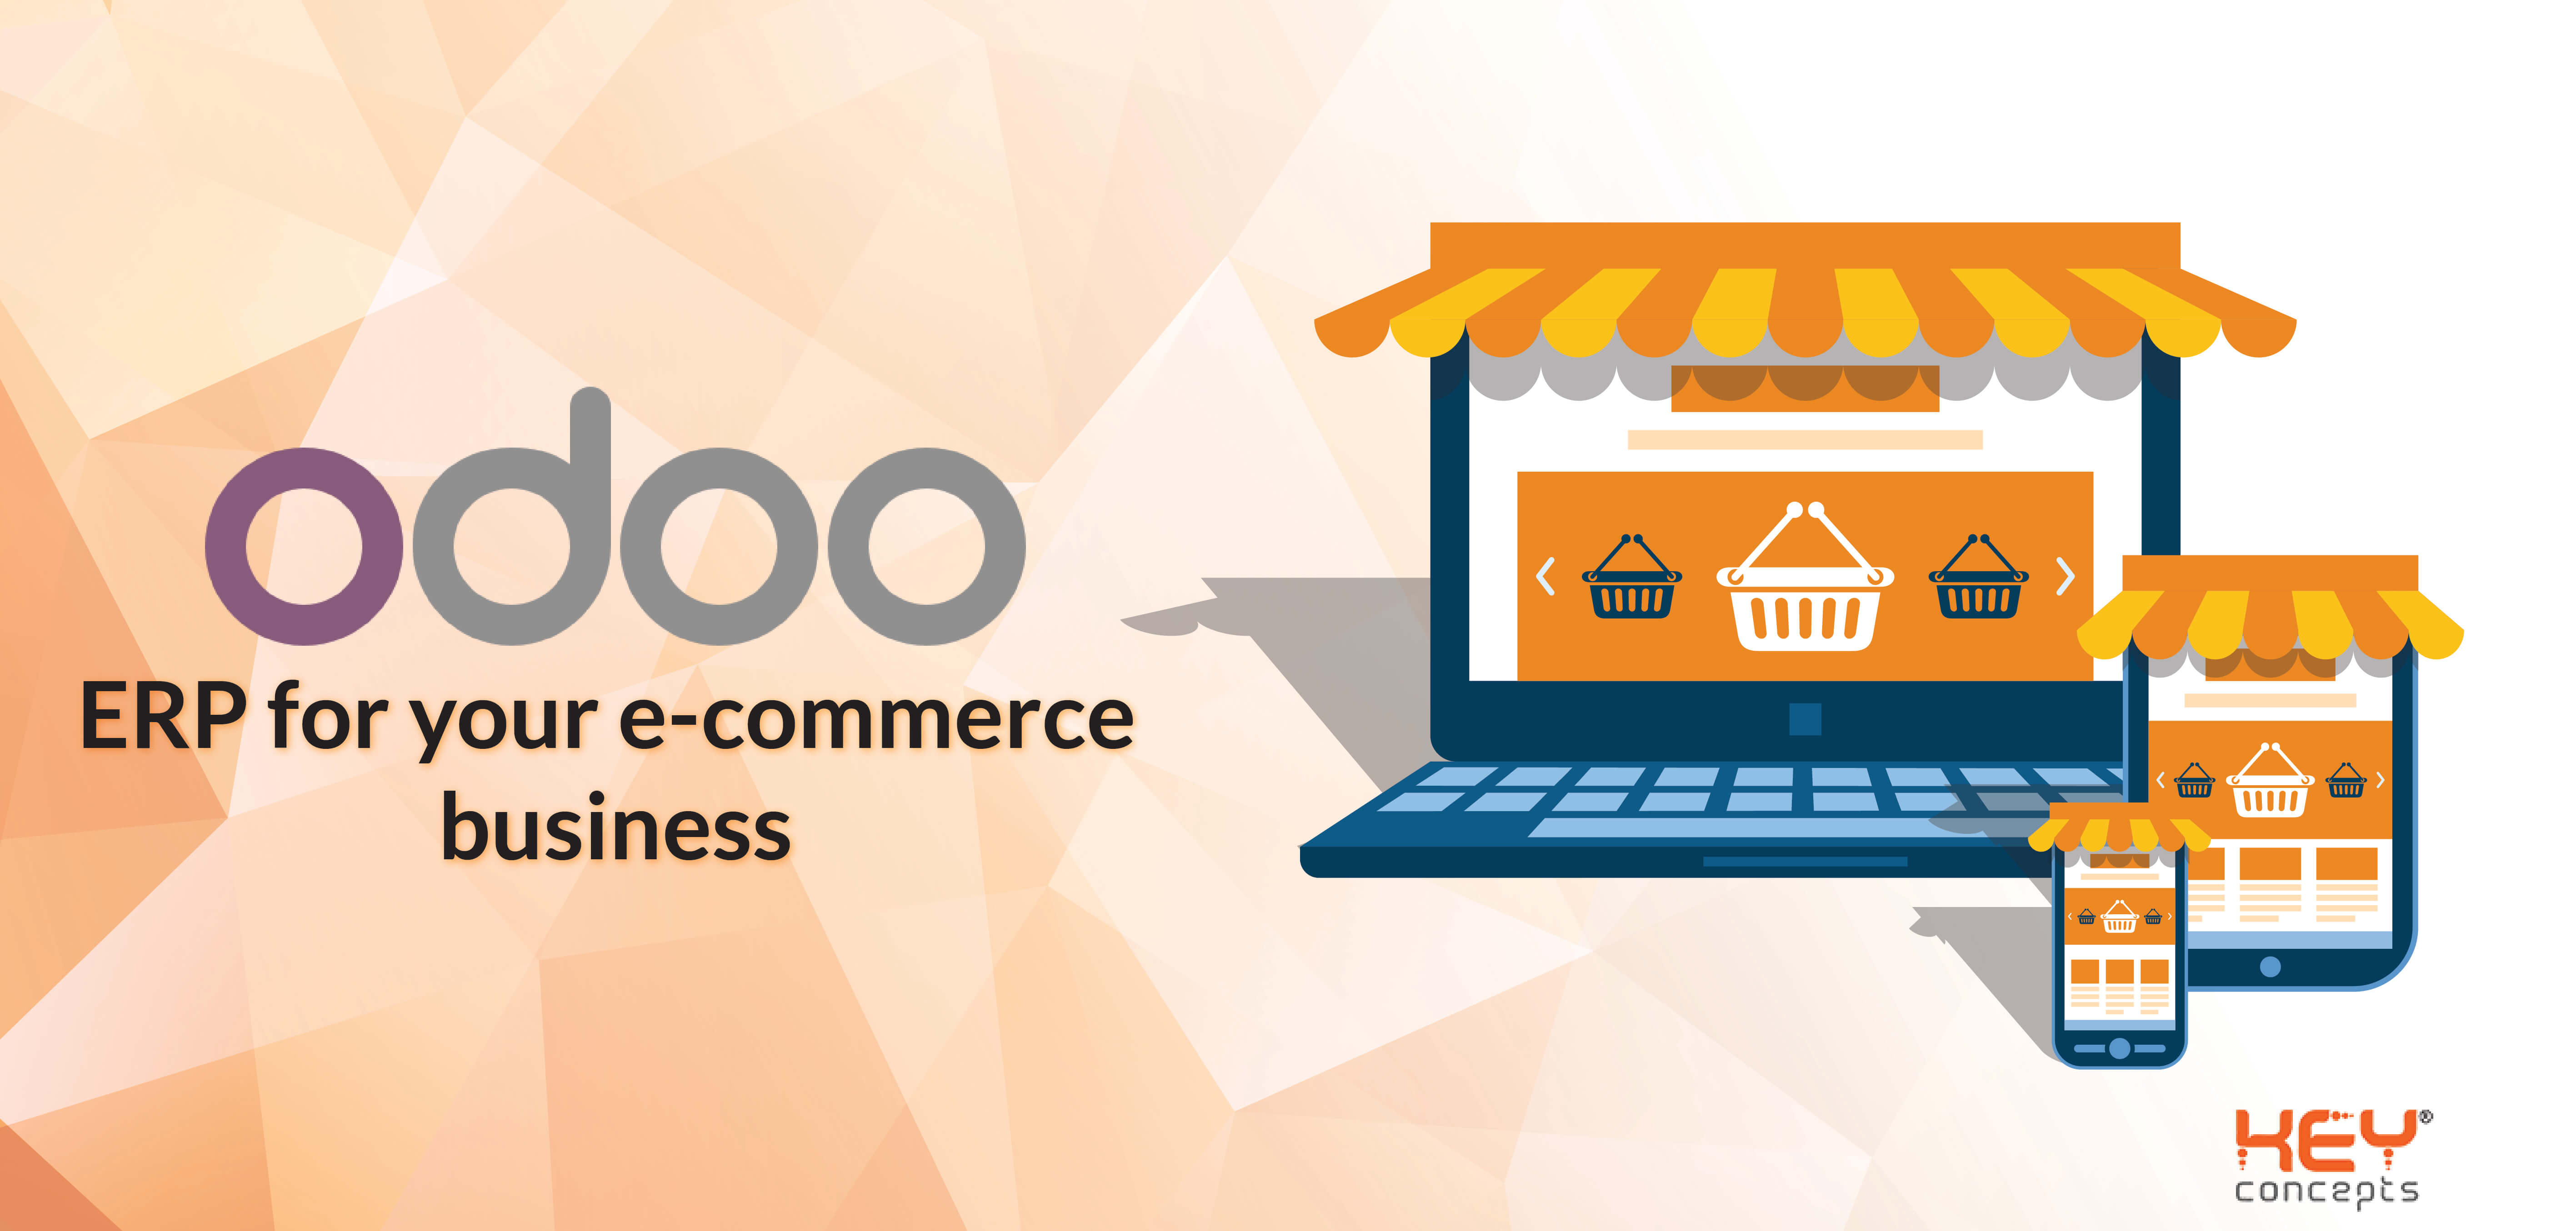 THE E-COMMERCE ENTREPRENEURS OF TODAY ARE CONSTANTLY KEEN TO DEVELOP A BUSINESS WHICH REQUIRES AN EXPONENTIAL GROWTH TO SUSTAIN IN THE COMPETITION.